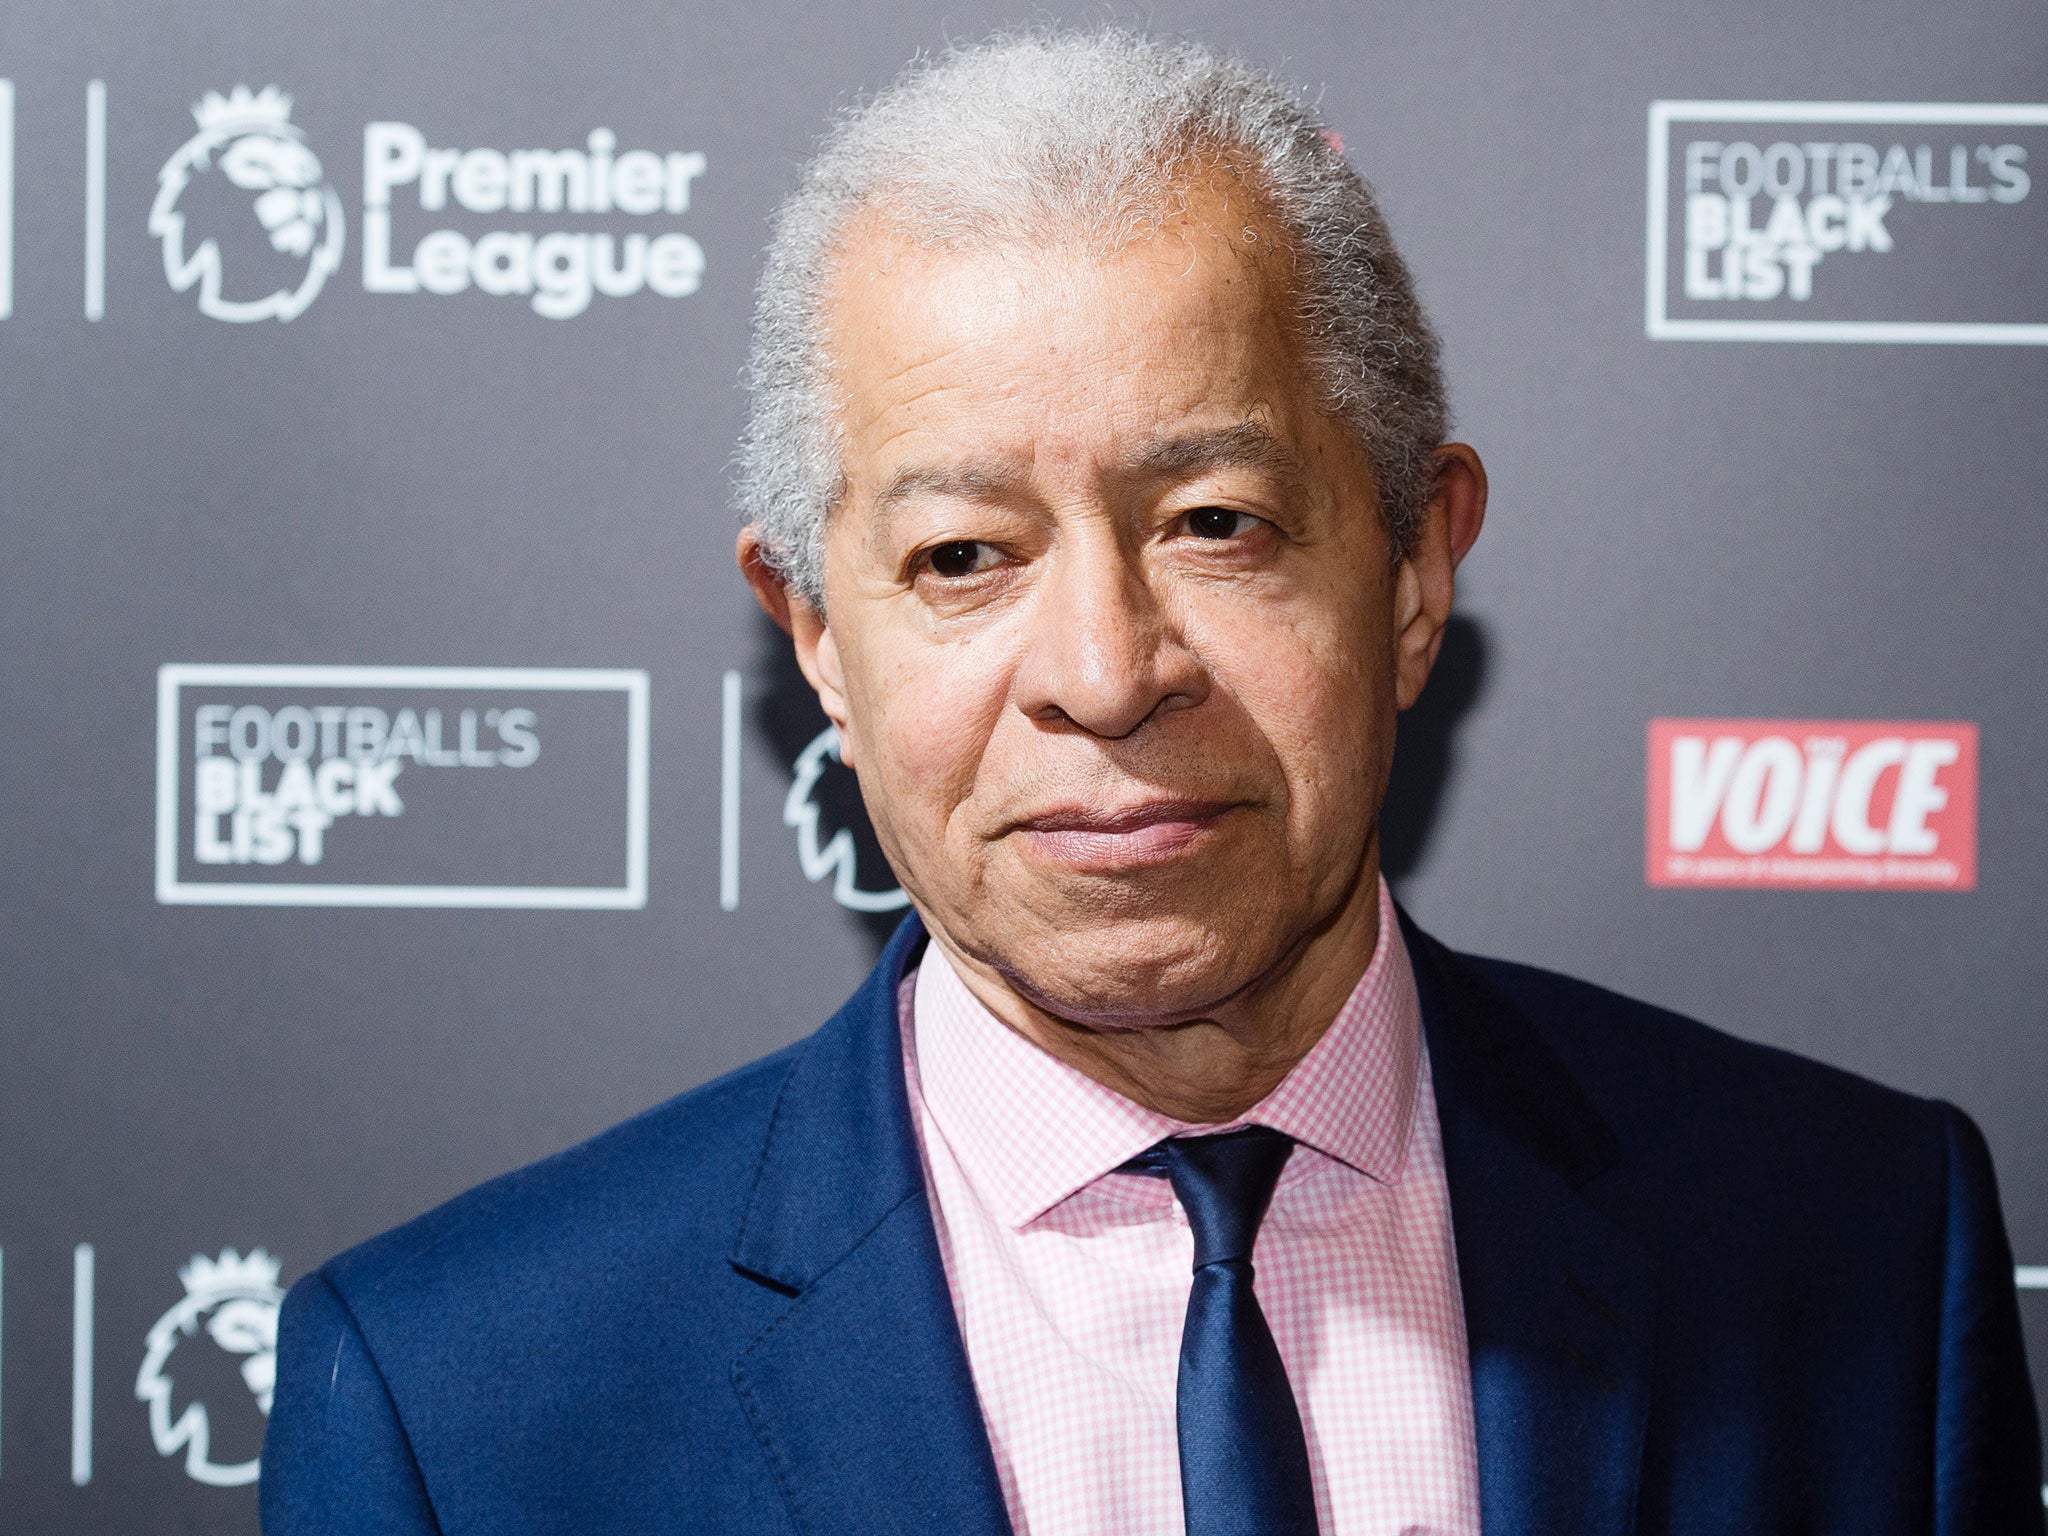 Lord Ouseley said tackling discrimination must be a 'collective effort'